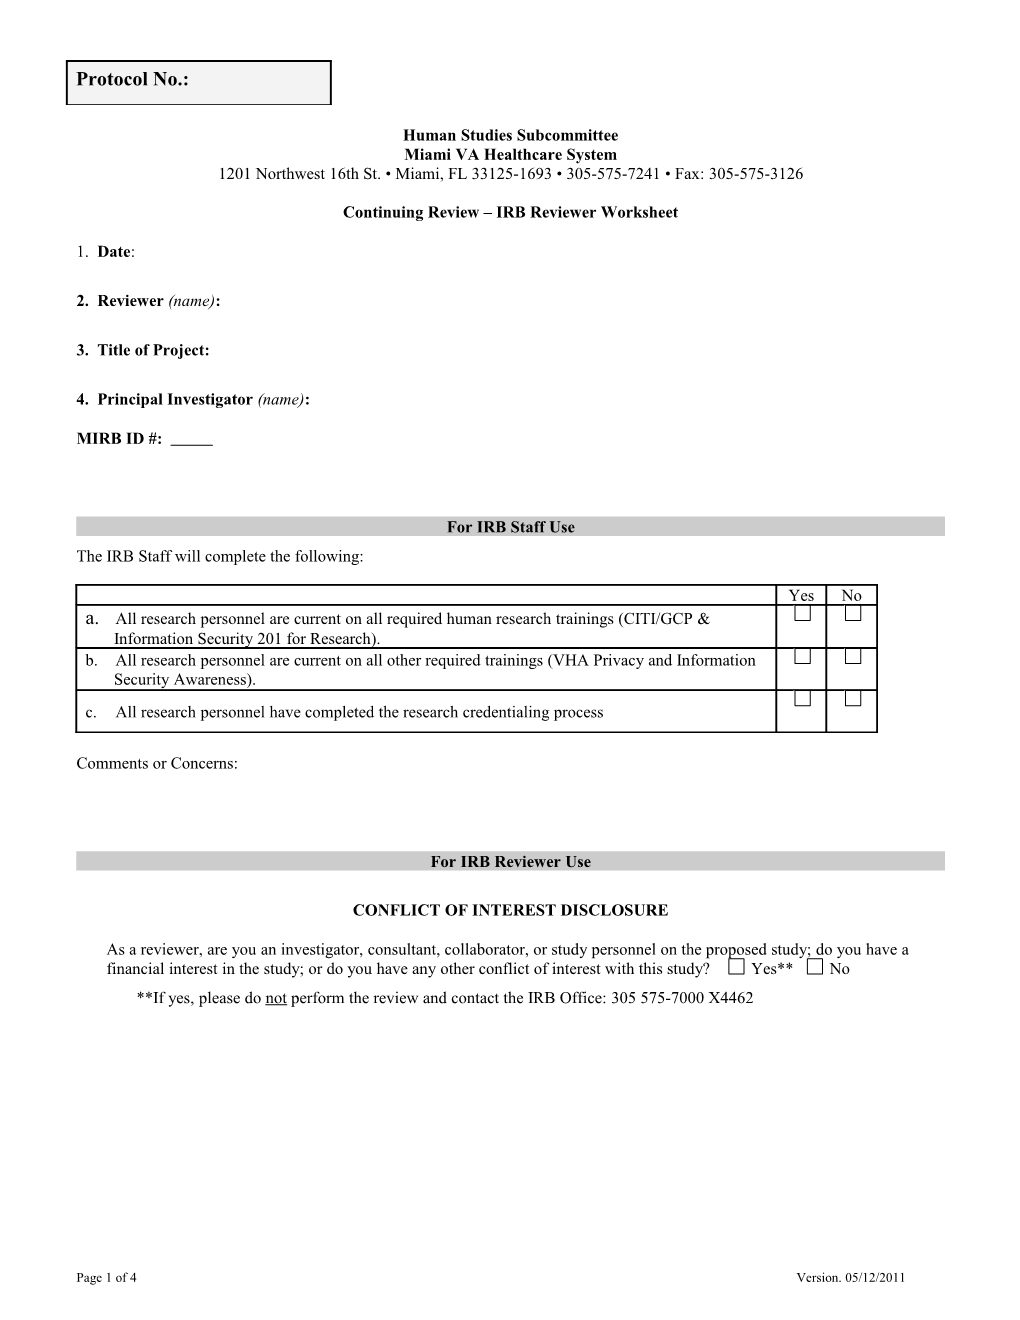 IRB Reviewer Worksheet for Continuing Review